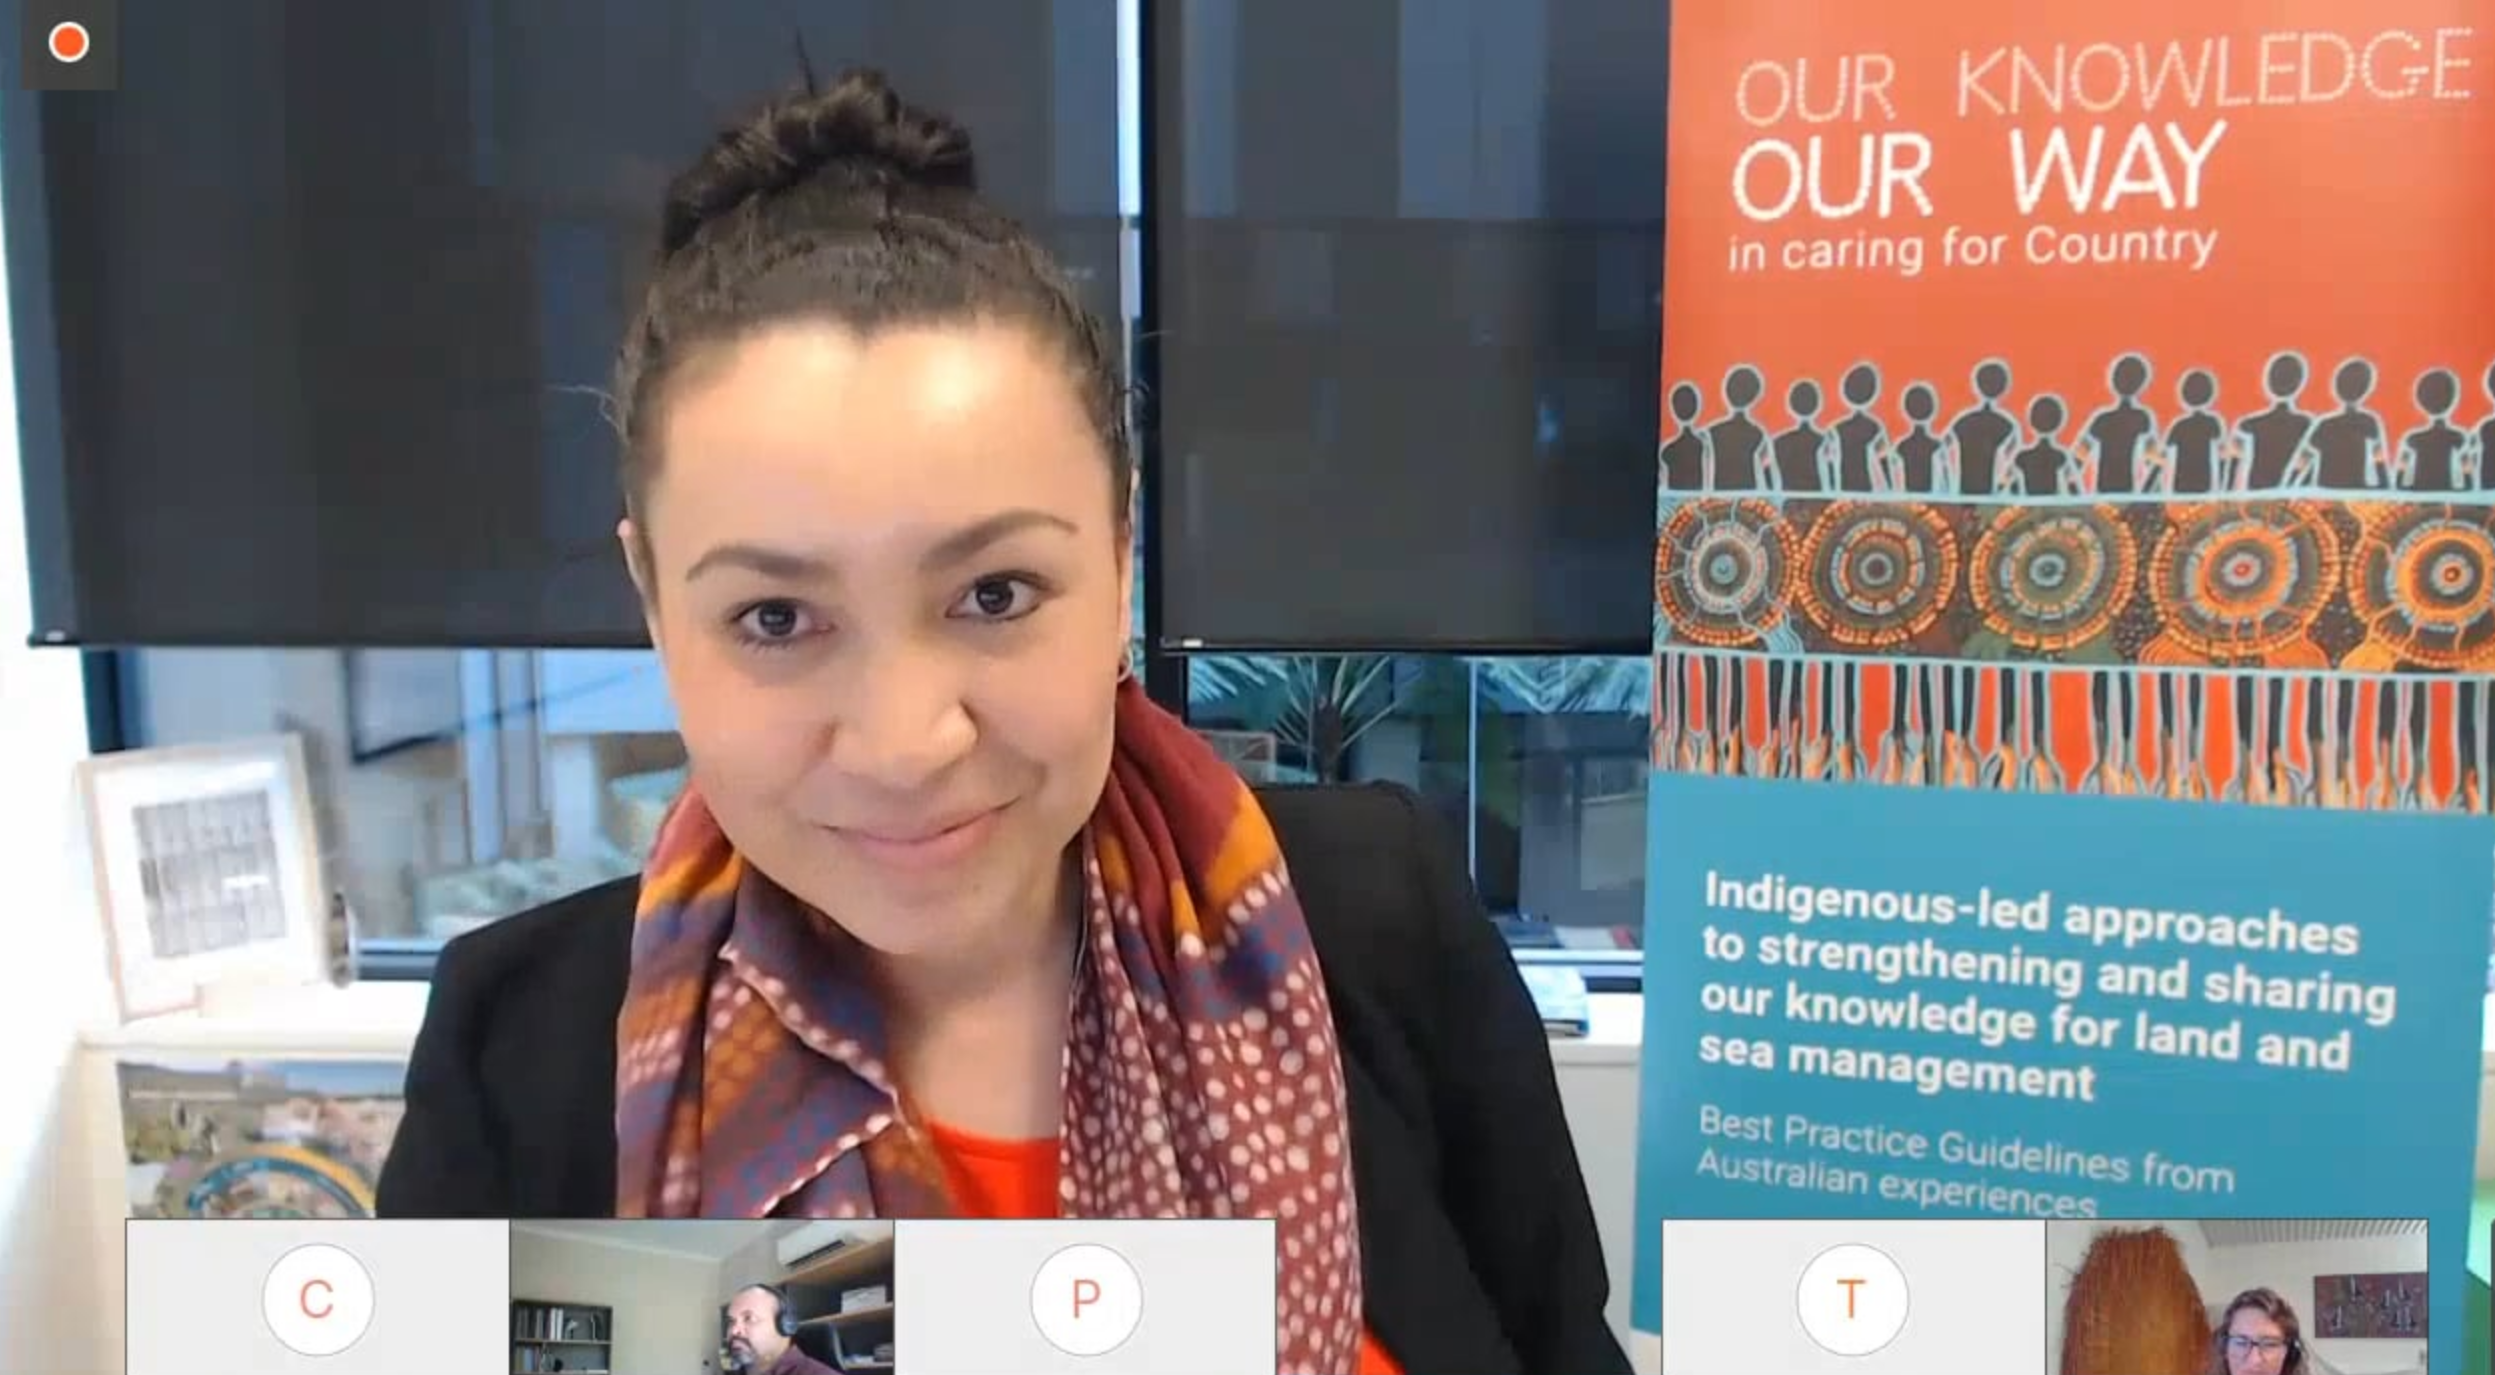 Louisa Warren introduces the webinar for the launch of the Our Knowledge Our Way guidelines.